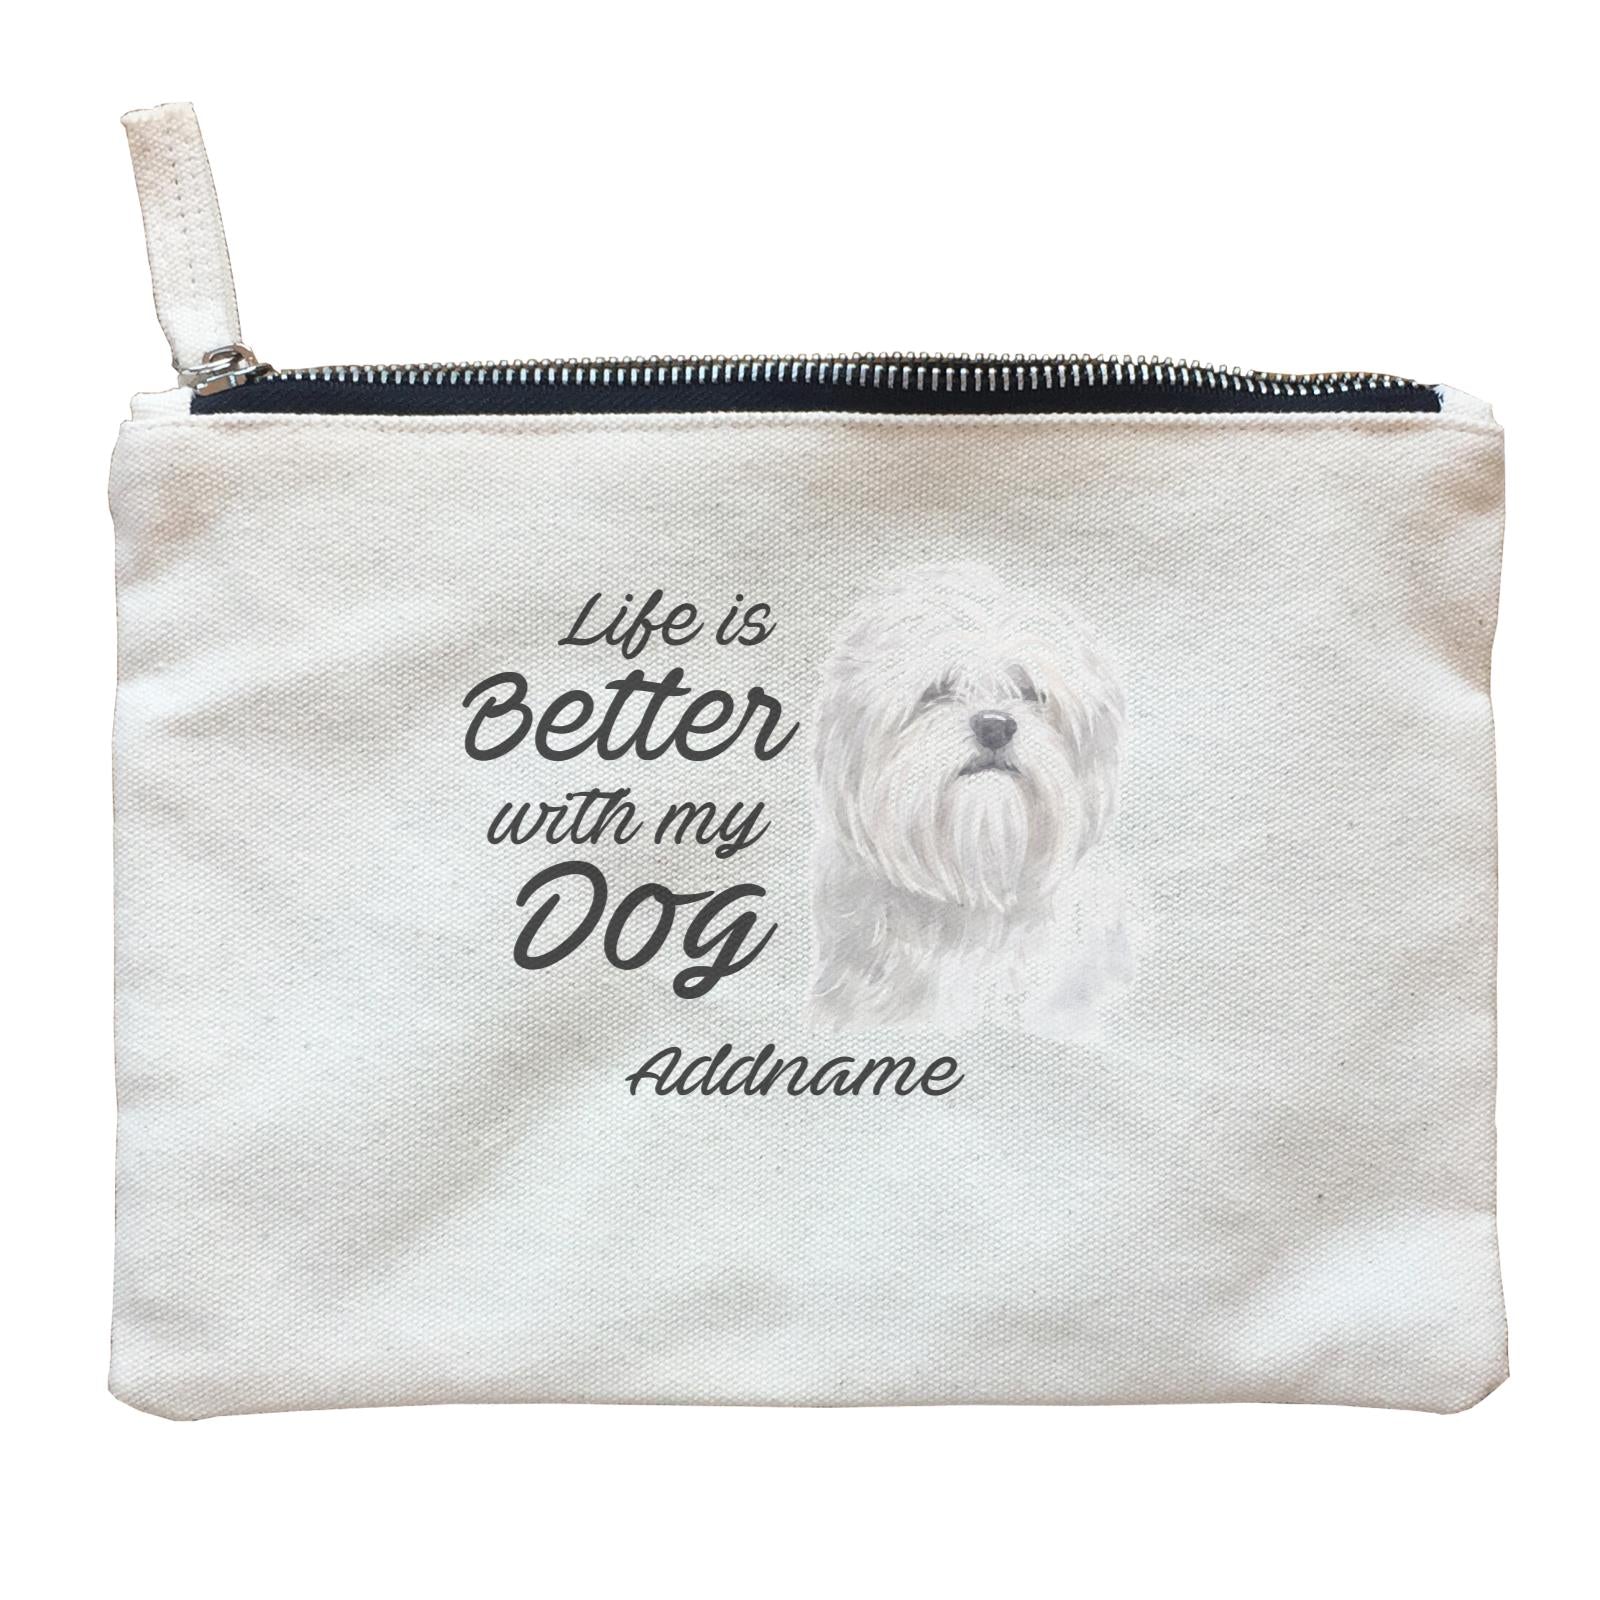 Watercolor Life is Better With My Dog Lhasa Apso Addname Zipper Pouch